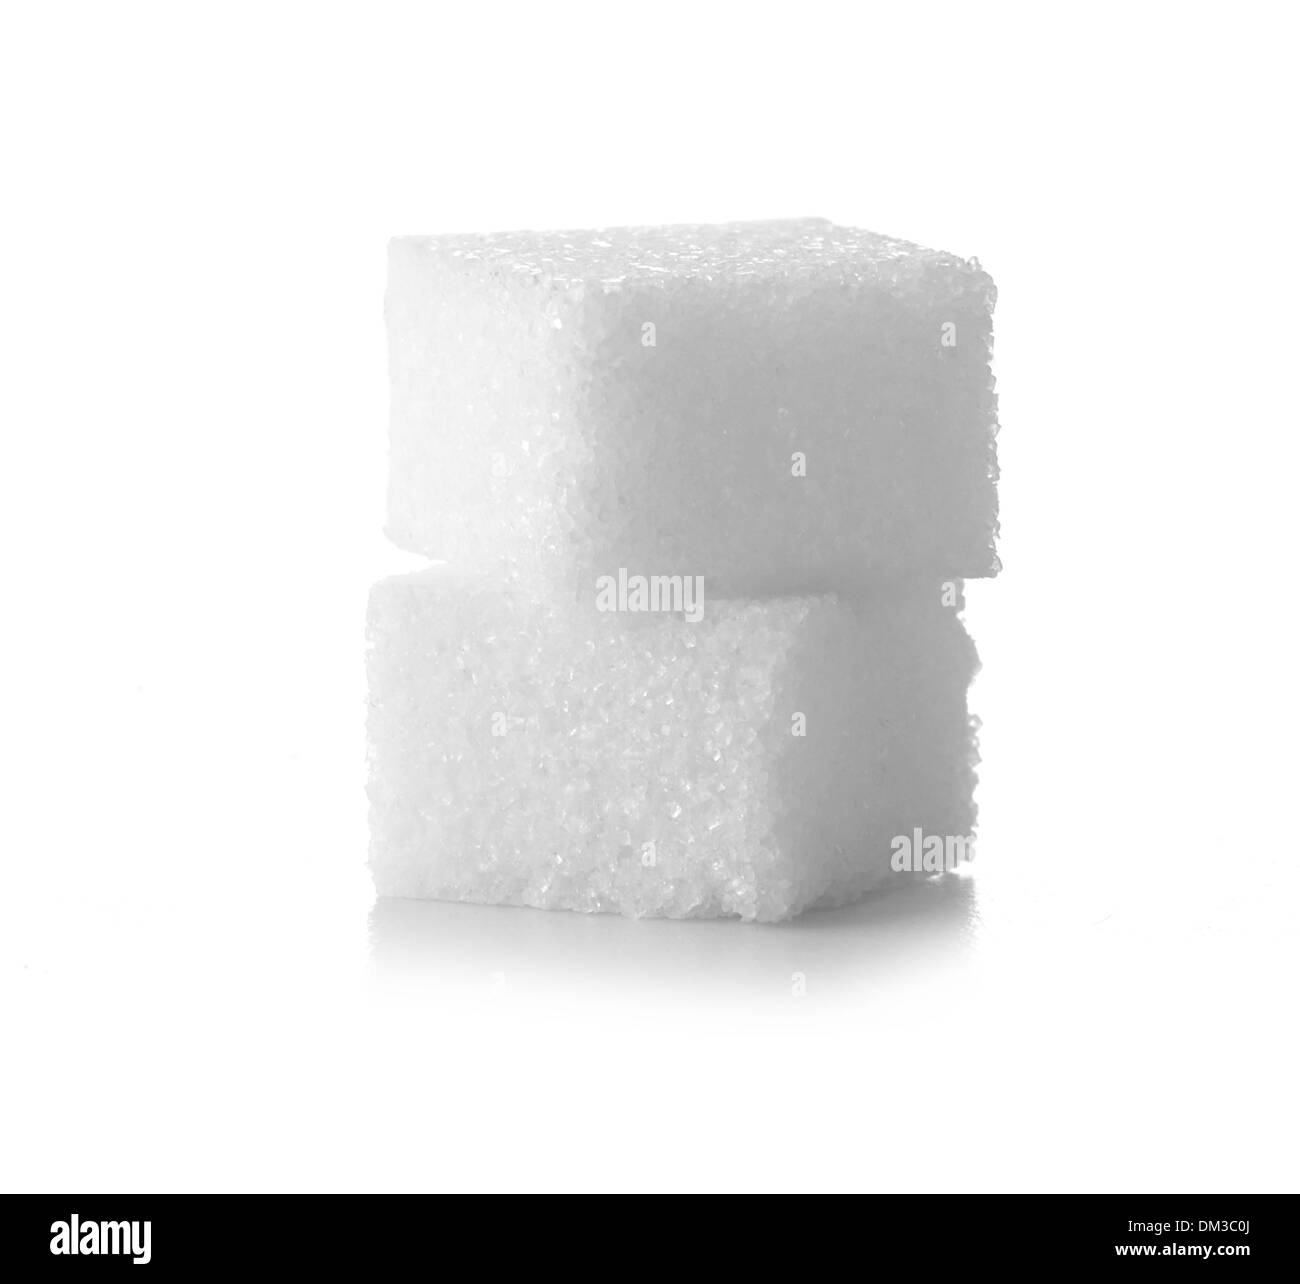 Sugar cubes cut out on white background Stock Photo